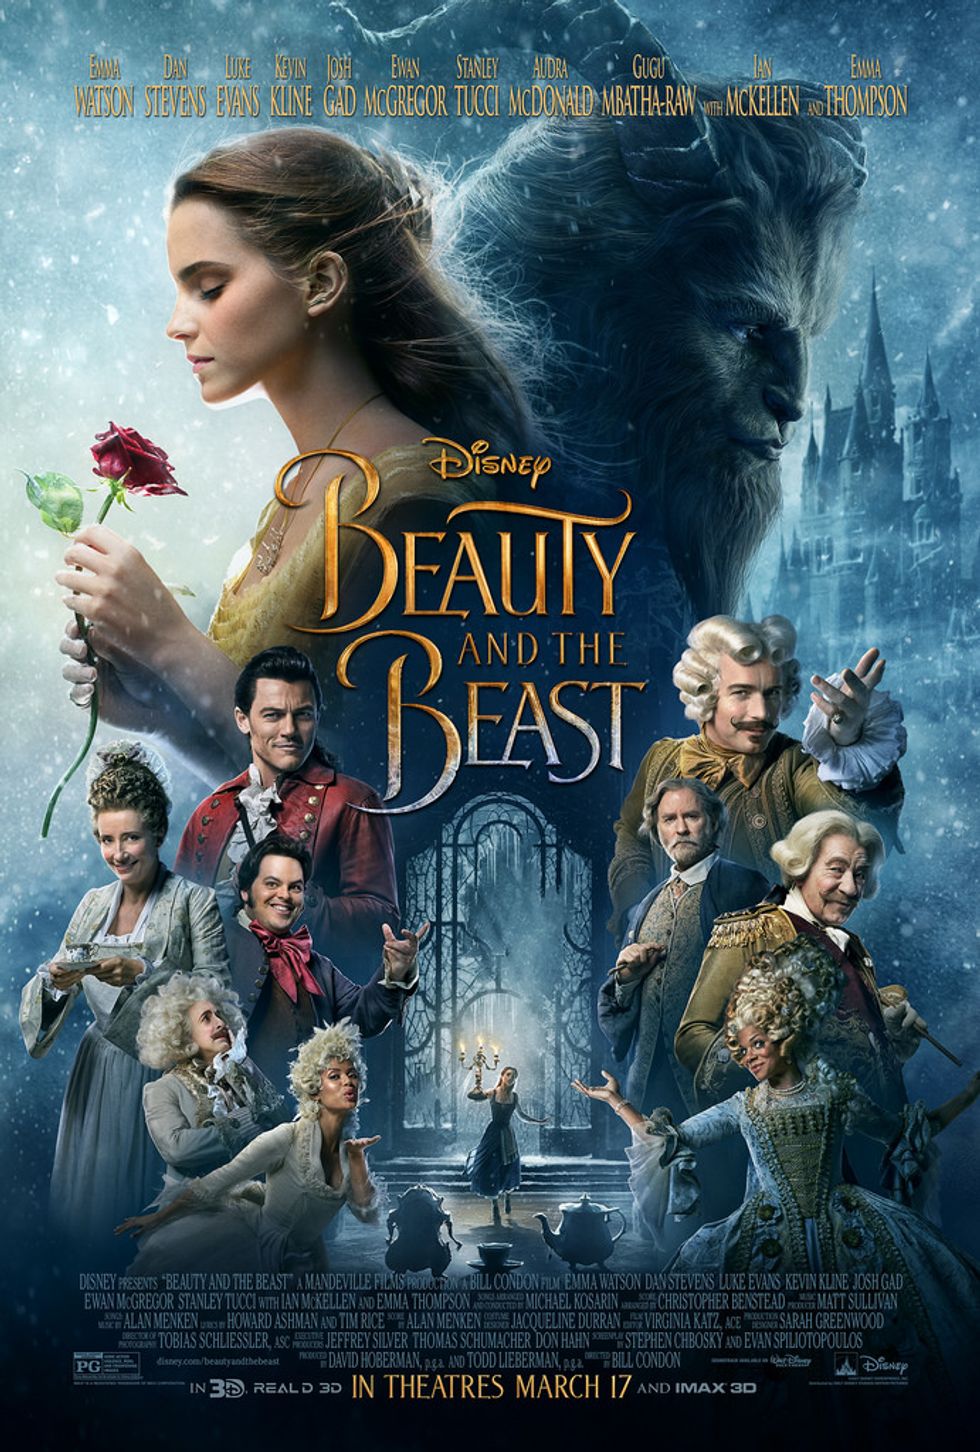 Why You Should Go See the New Live-Action Beauty and the Beast